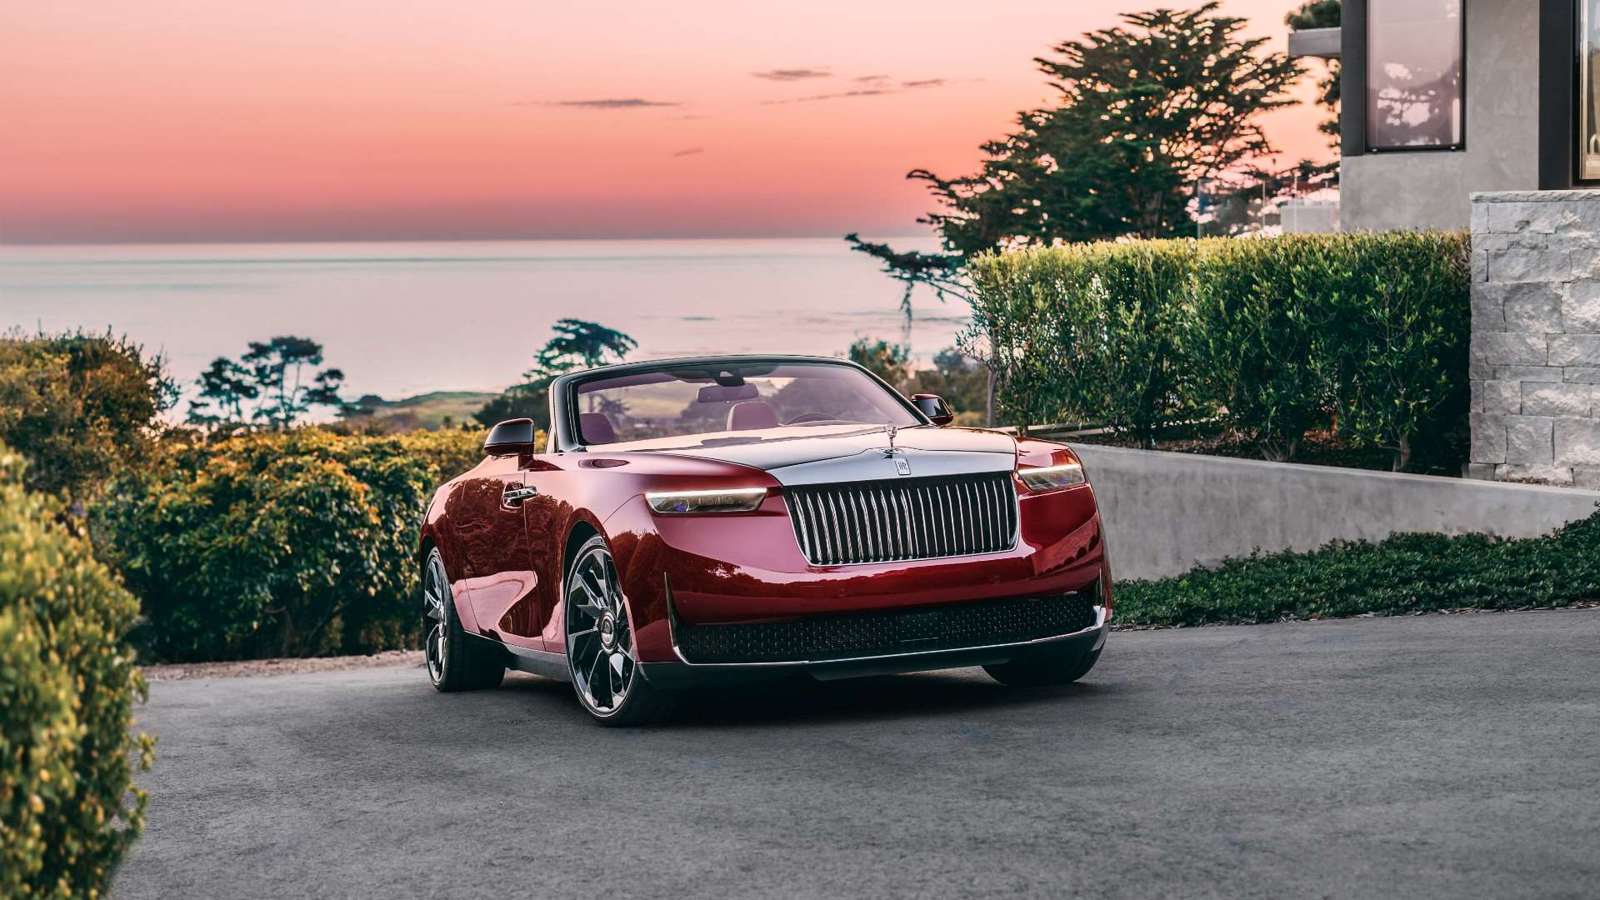 How Much Is a Rolls-Royce? Here's a Price Breakdown